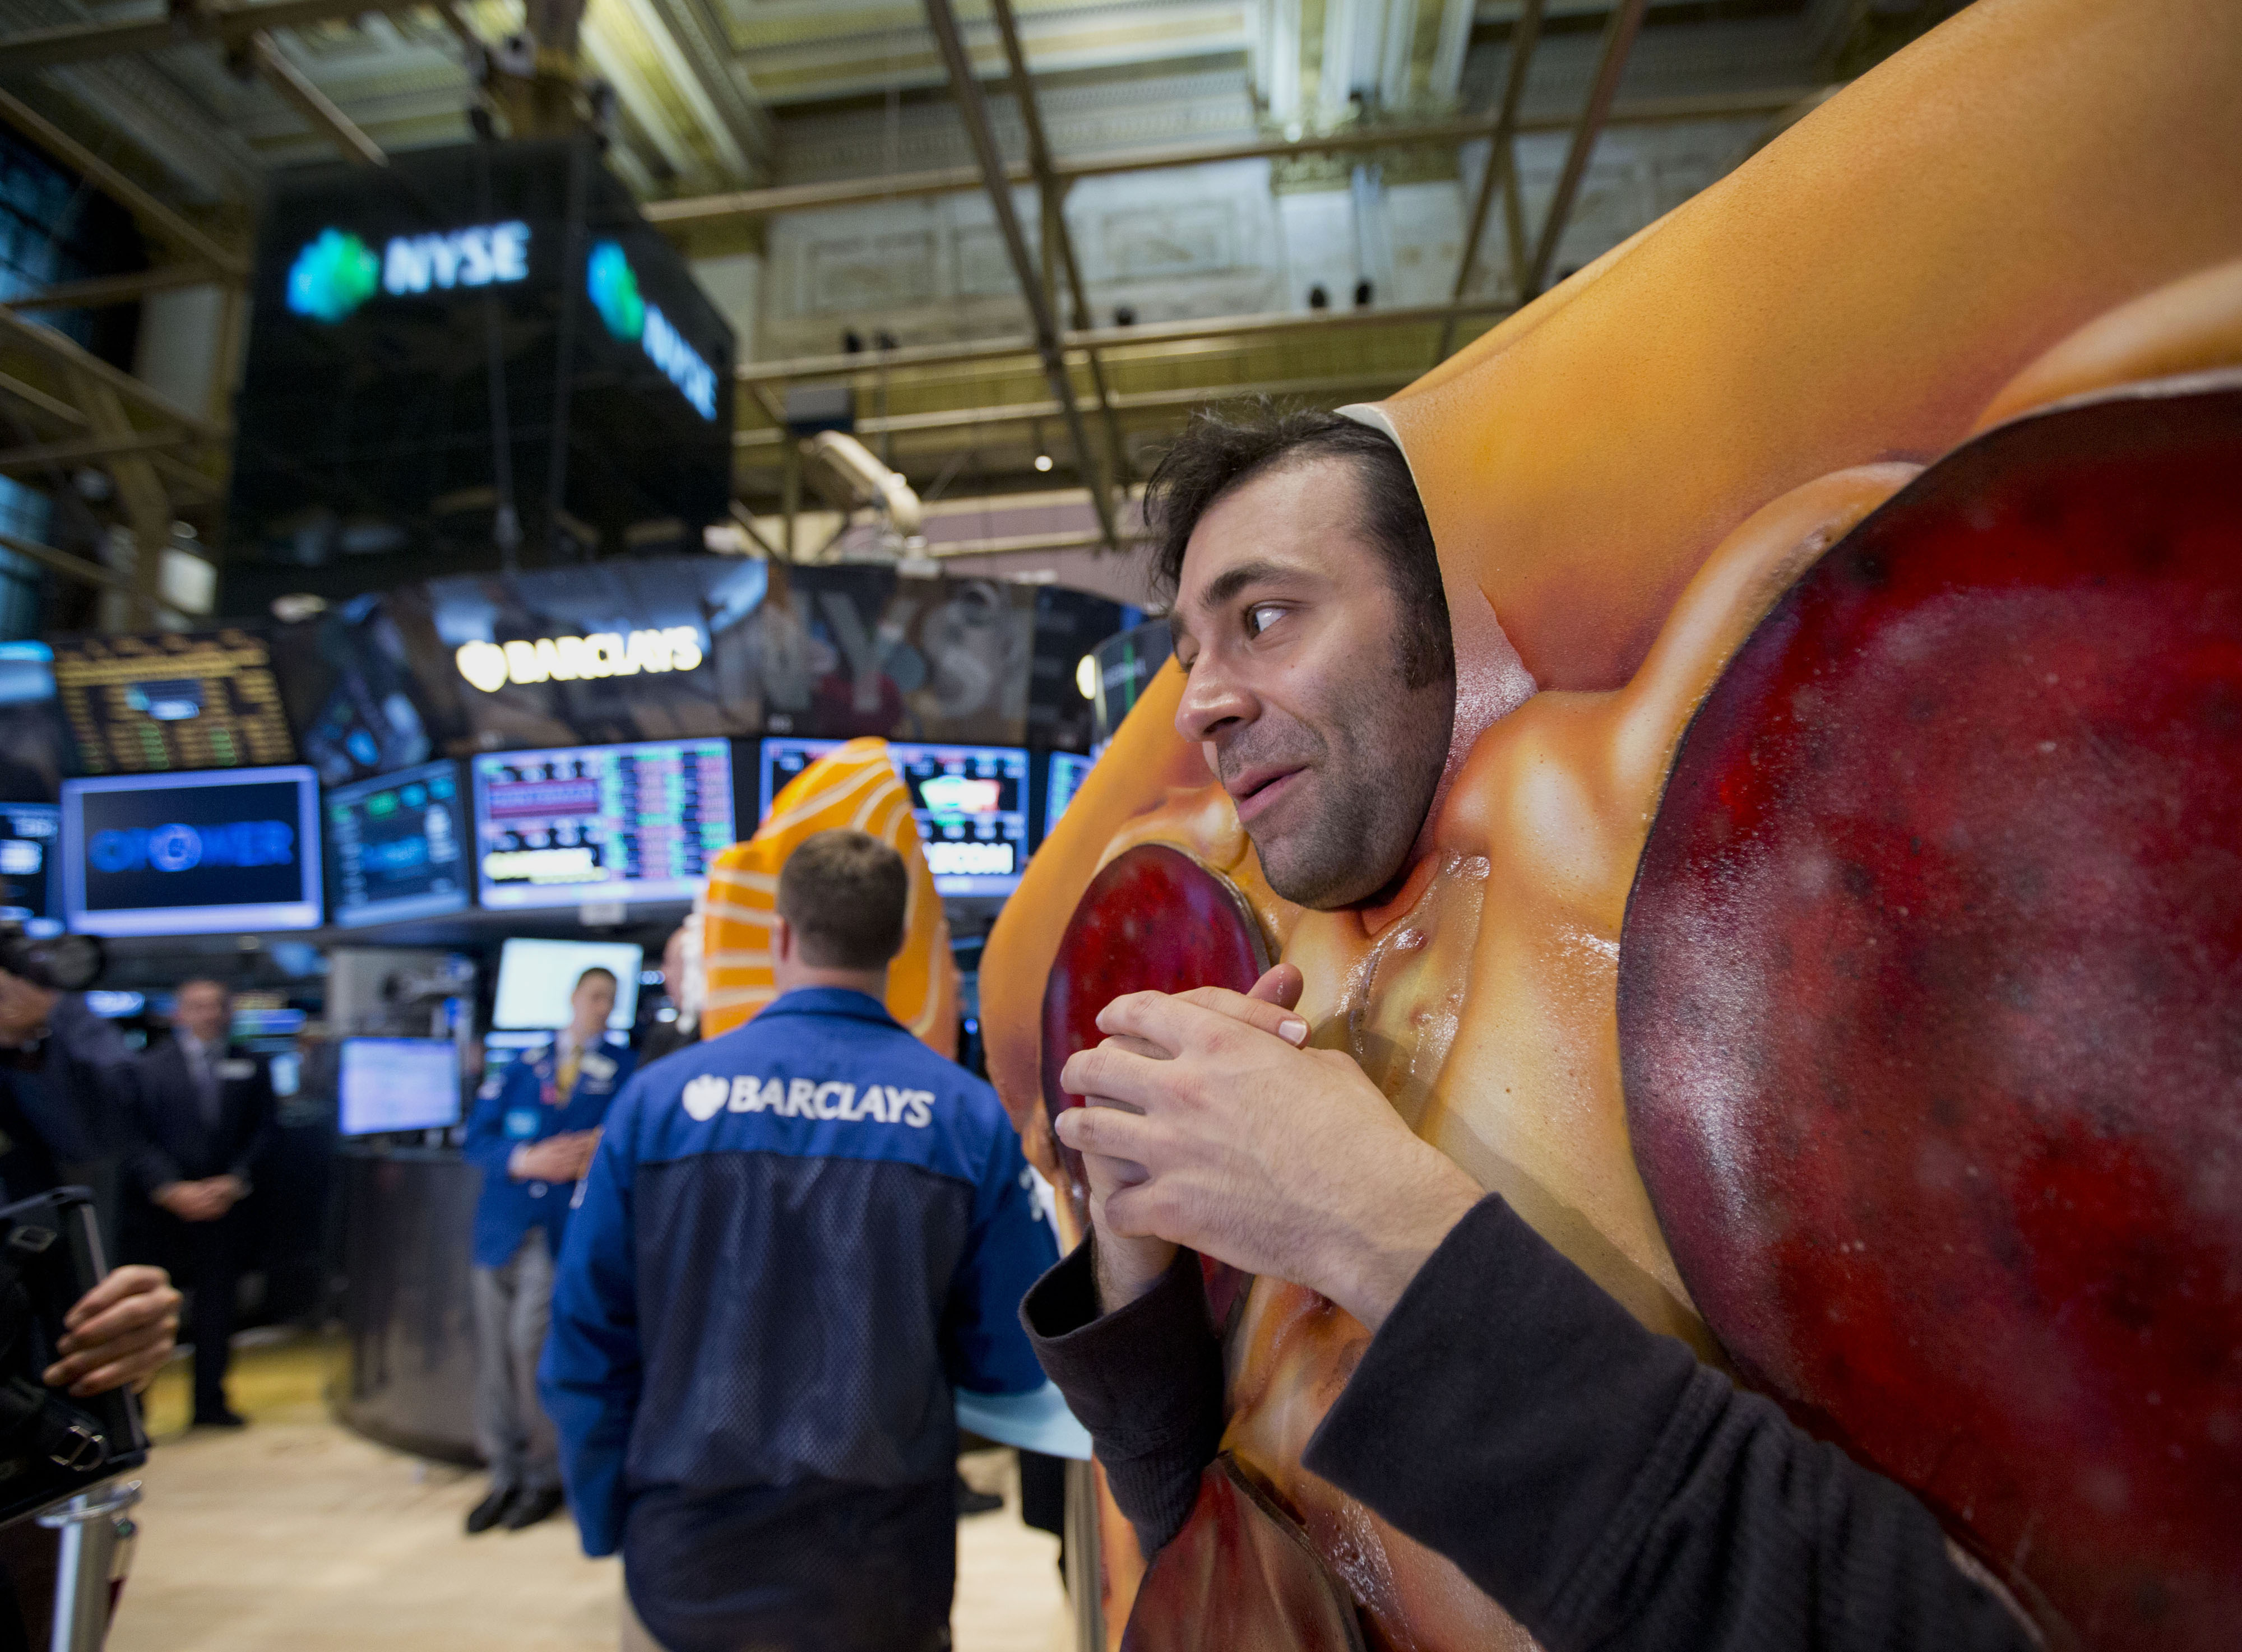 Actors dressed in Grubhub Inc. costumes interact with traders on the floor of the New York Stock Exchange in New York, U.S., on Friday, April 4, 2014. (Bloomberg&mdash;Bloomberg via Getty Images)